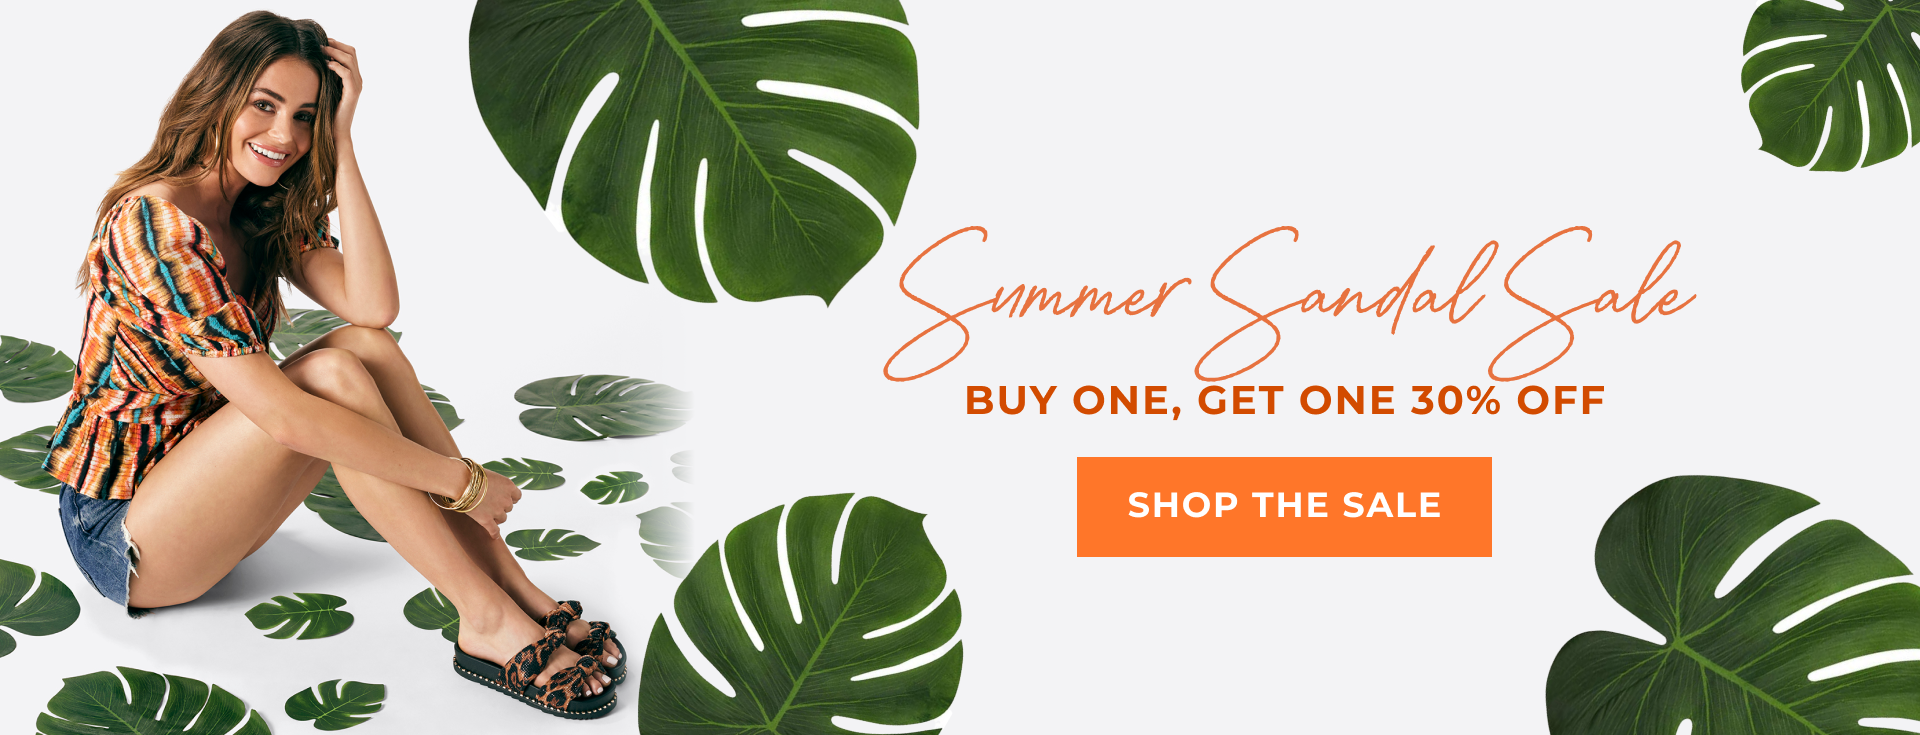 Summer Sandal Sale Buy One, Get One 30% Off Shop the Sale